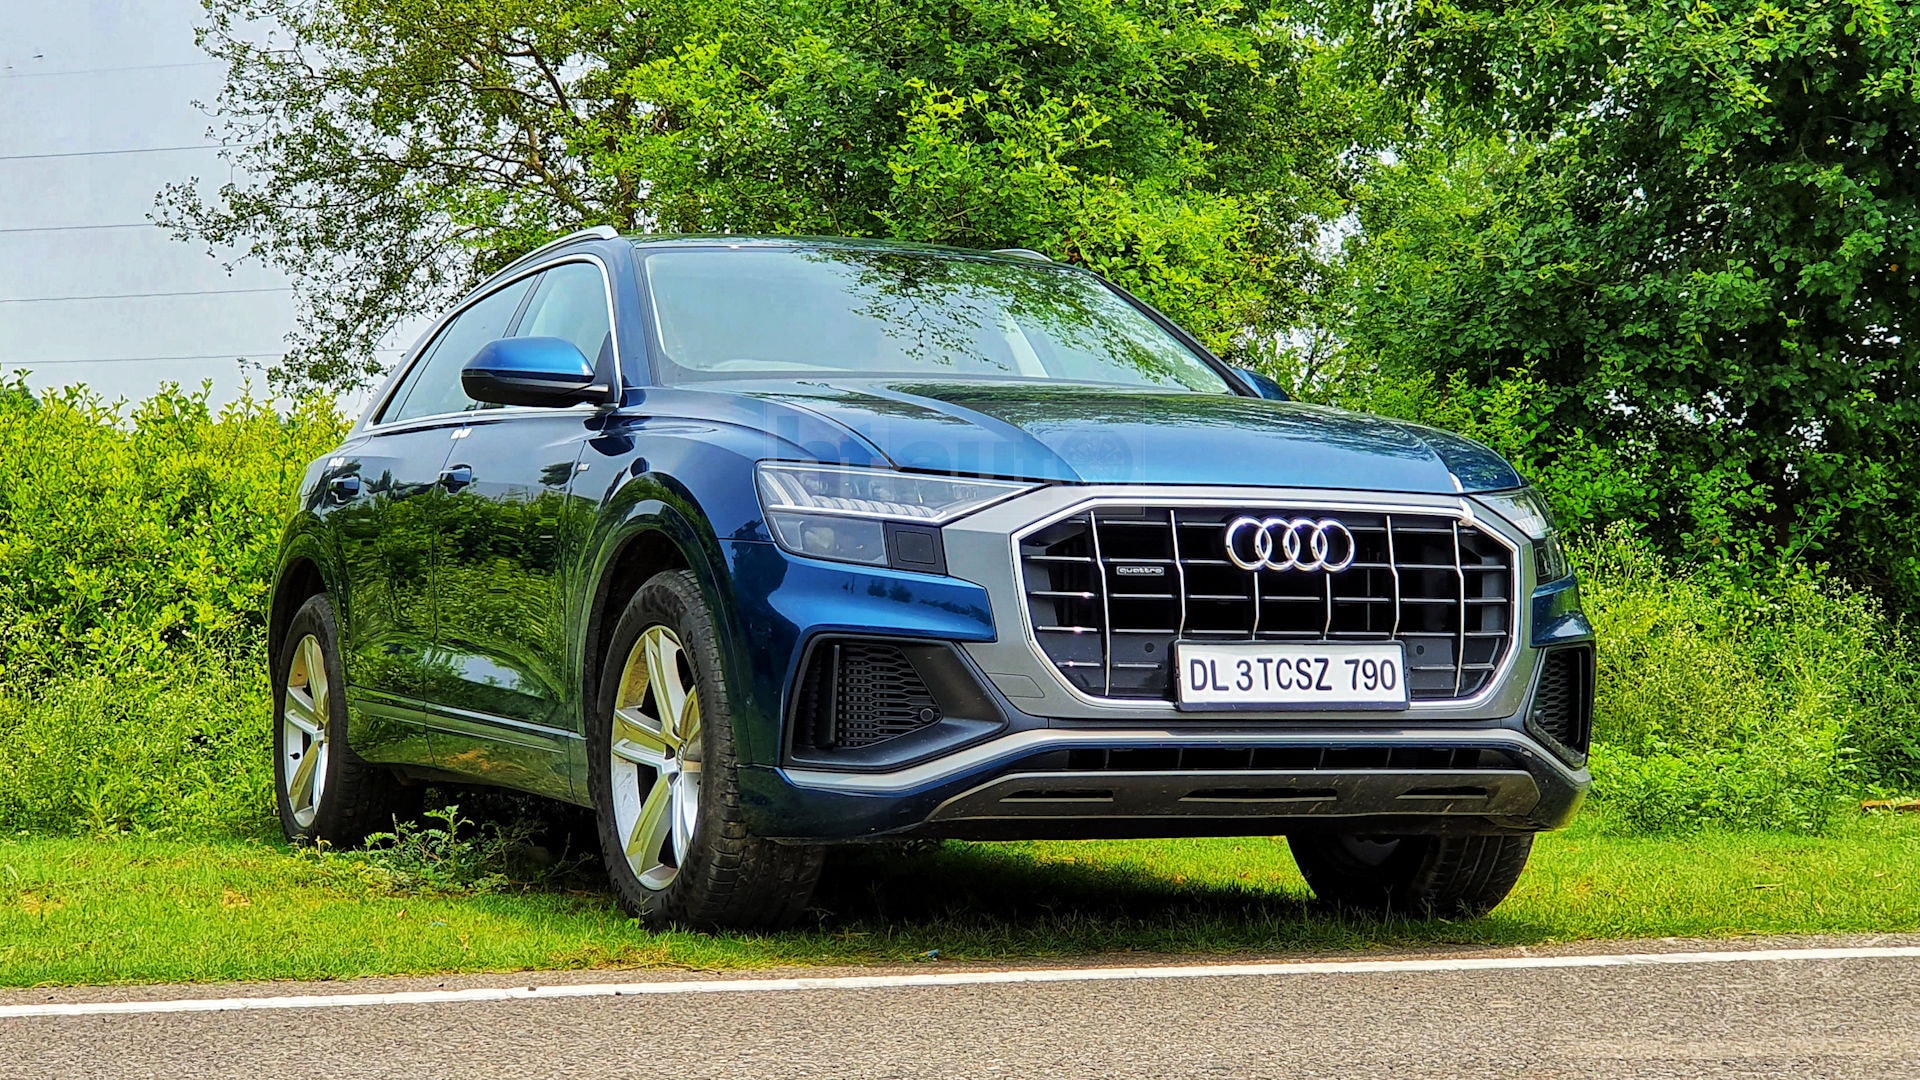 Numerically, the Q8 has slightly smaller proportions than the Q7 for most parts but the wheelbase is similar and visually, the flagship is perhaps even more imposing. (HTAuto.com/Sabyasachi Dasgupta)